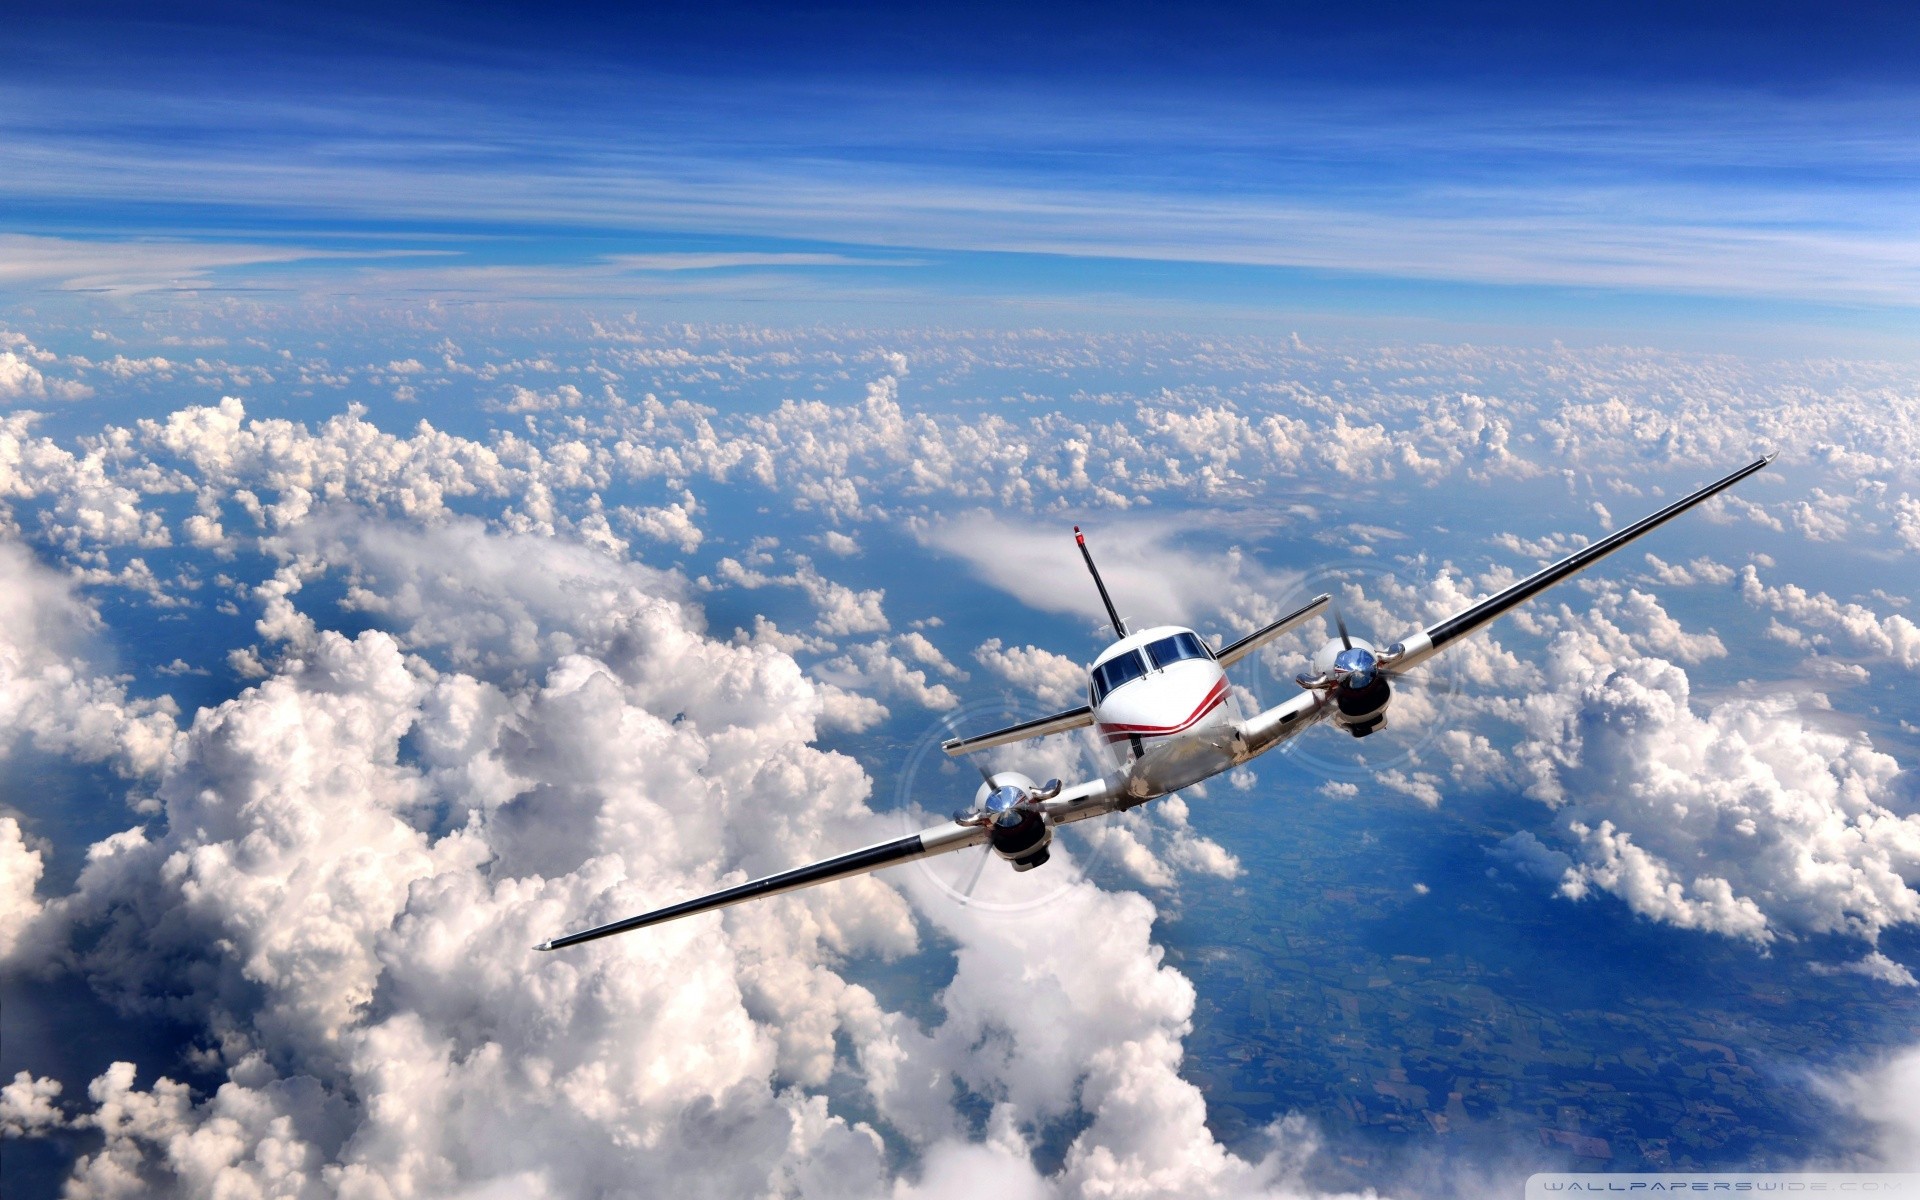 General 1920x1200 clouds airplane aircraft vehicle sky